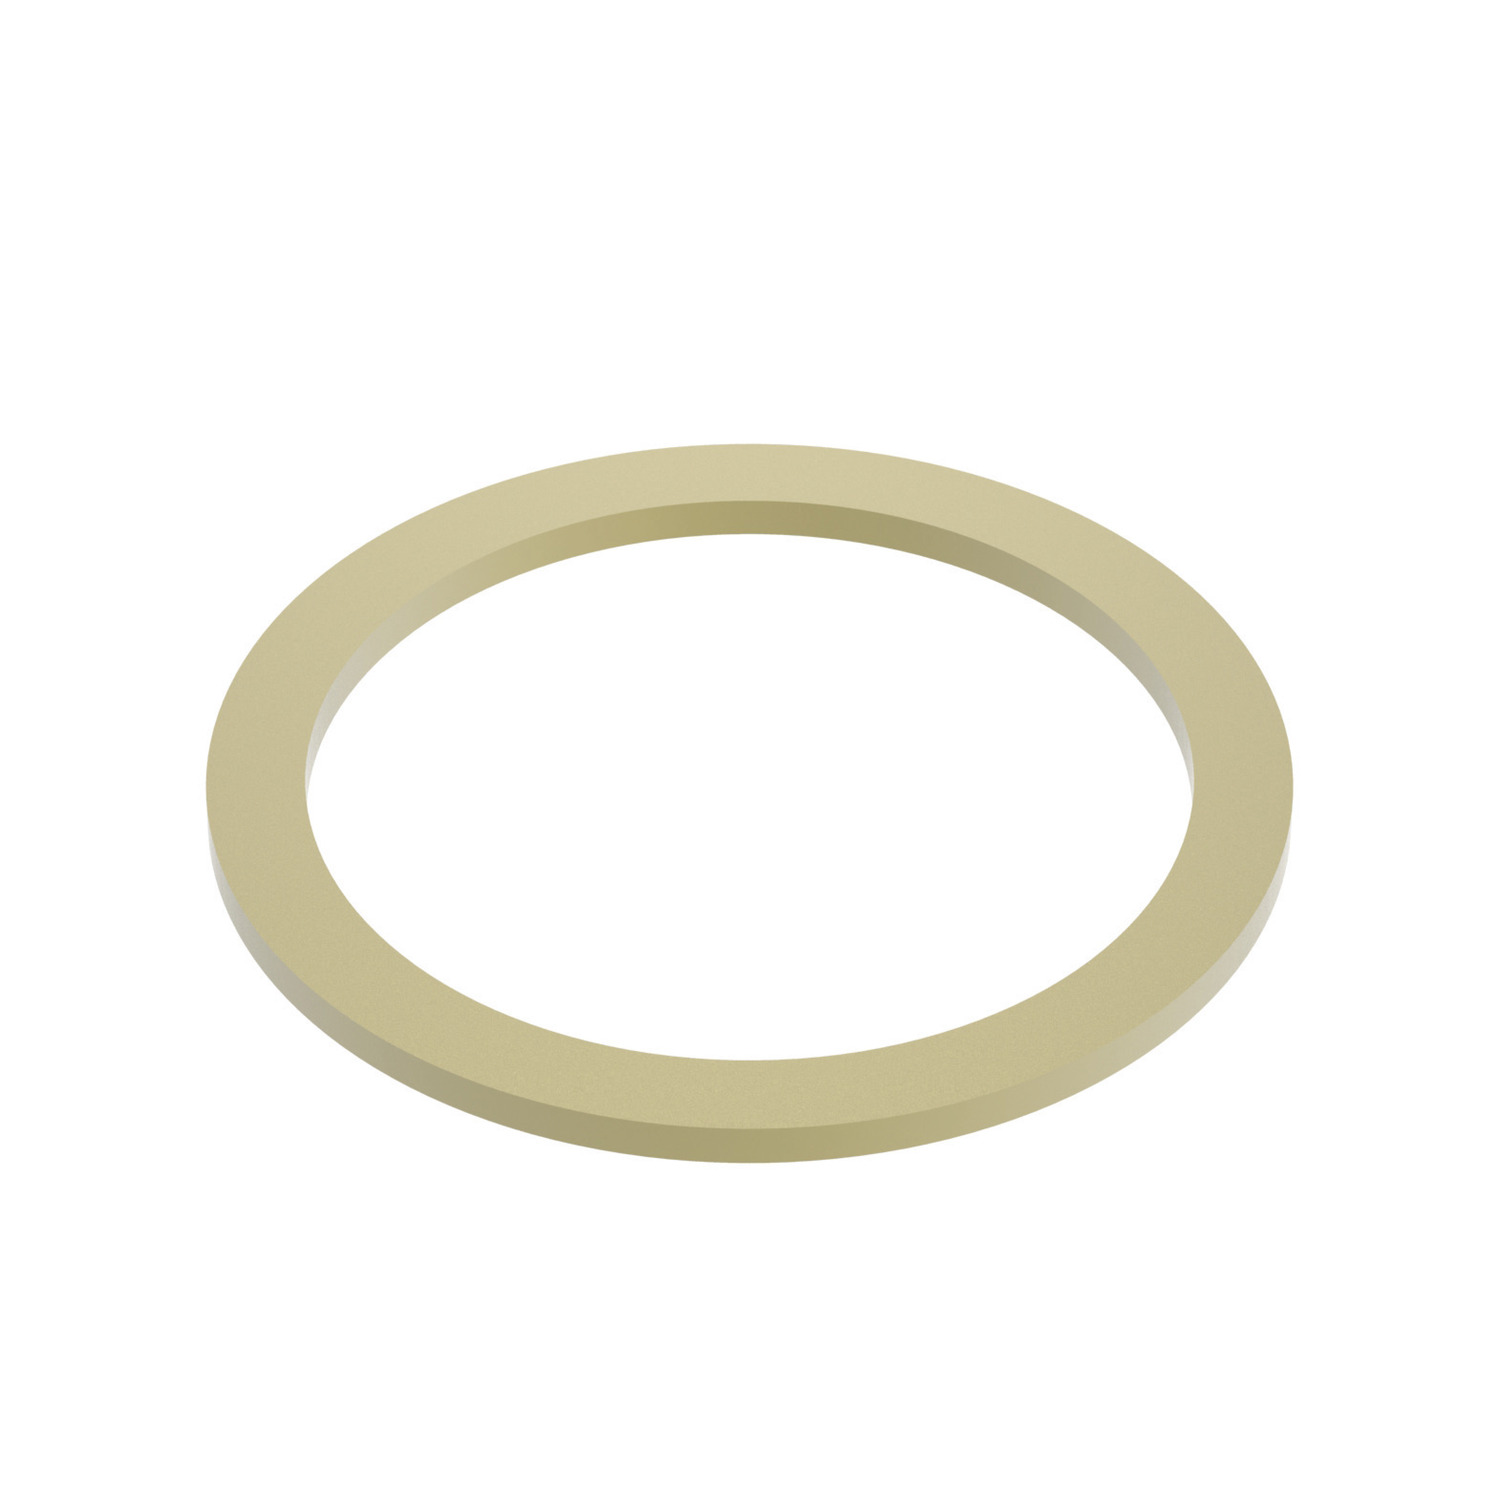 Product P0344.BR, Laminated Shim Spacers brass / 